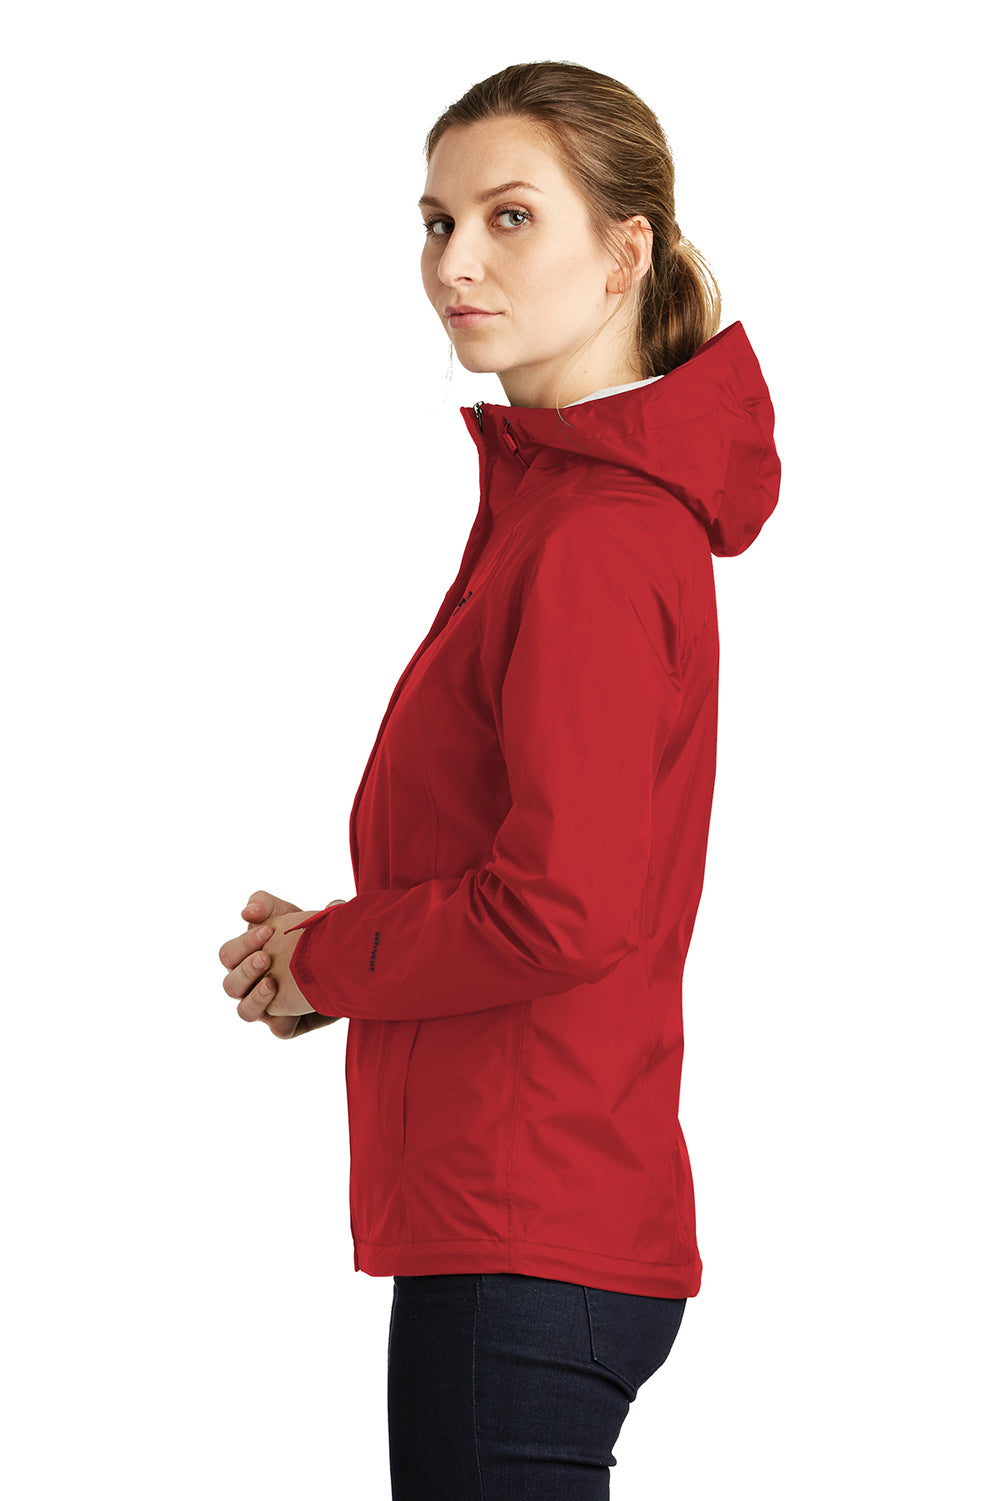 The North Face NF0A3LH5 Womens DryVent Waterproof Full Zip Hooded Jacket Rage Red Side